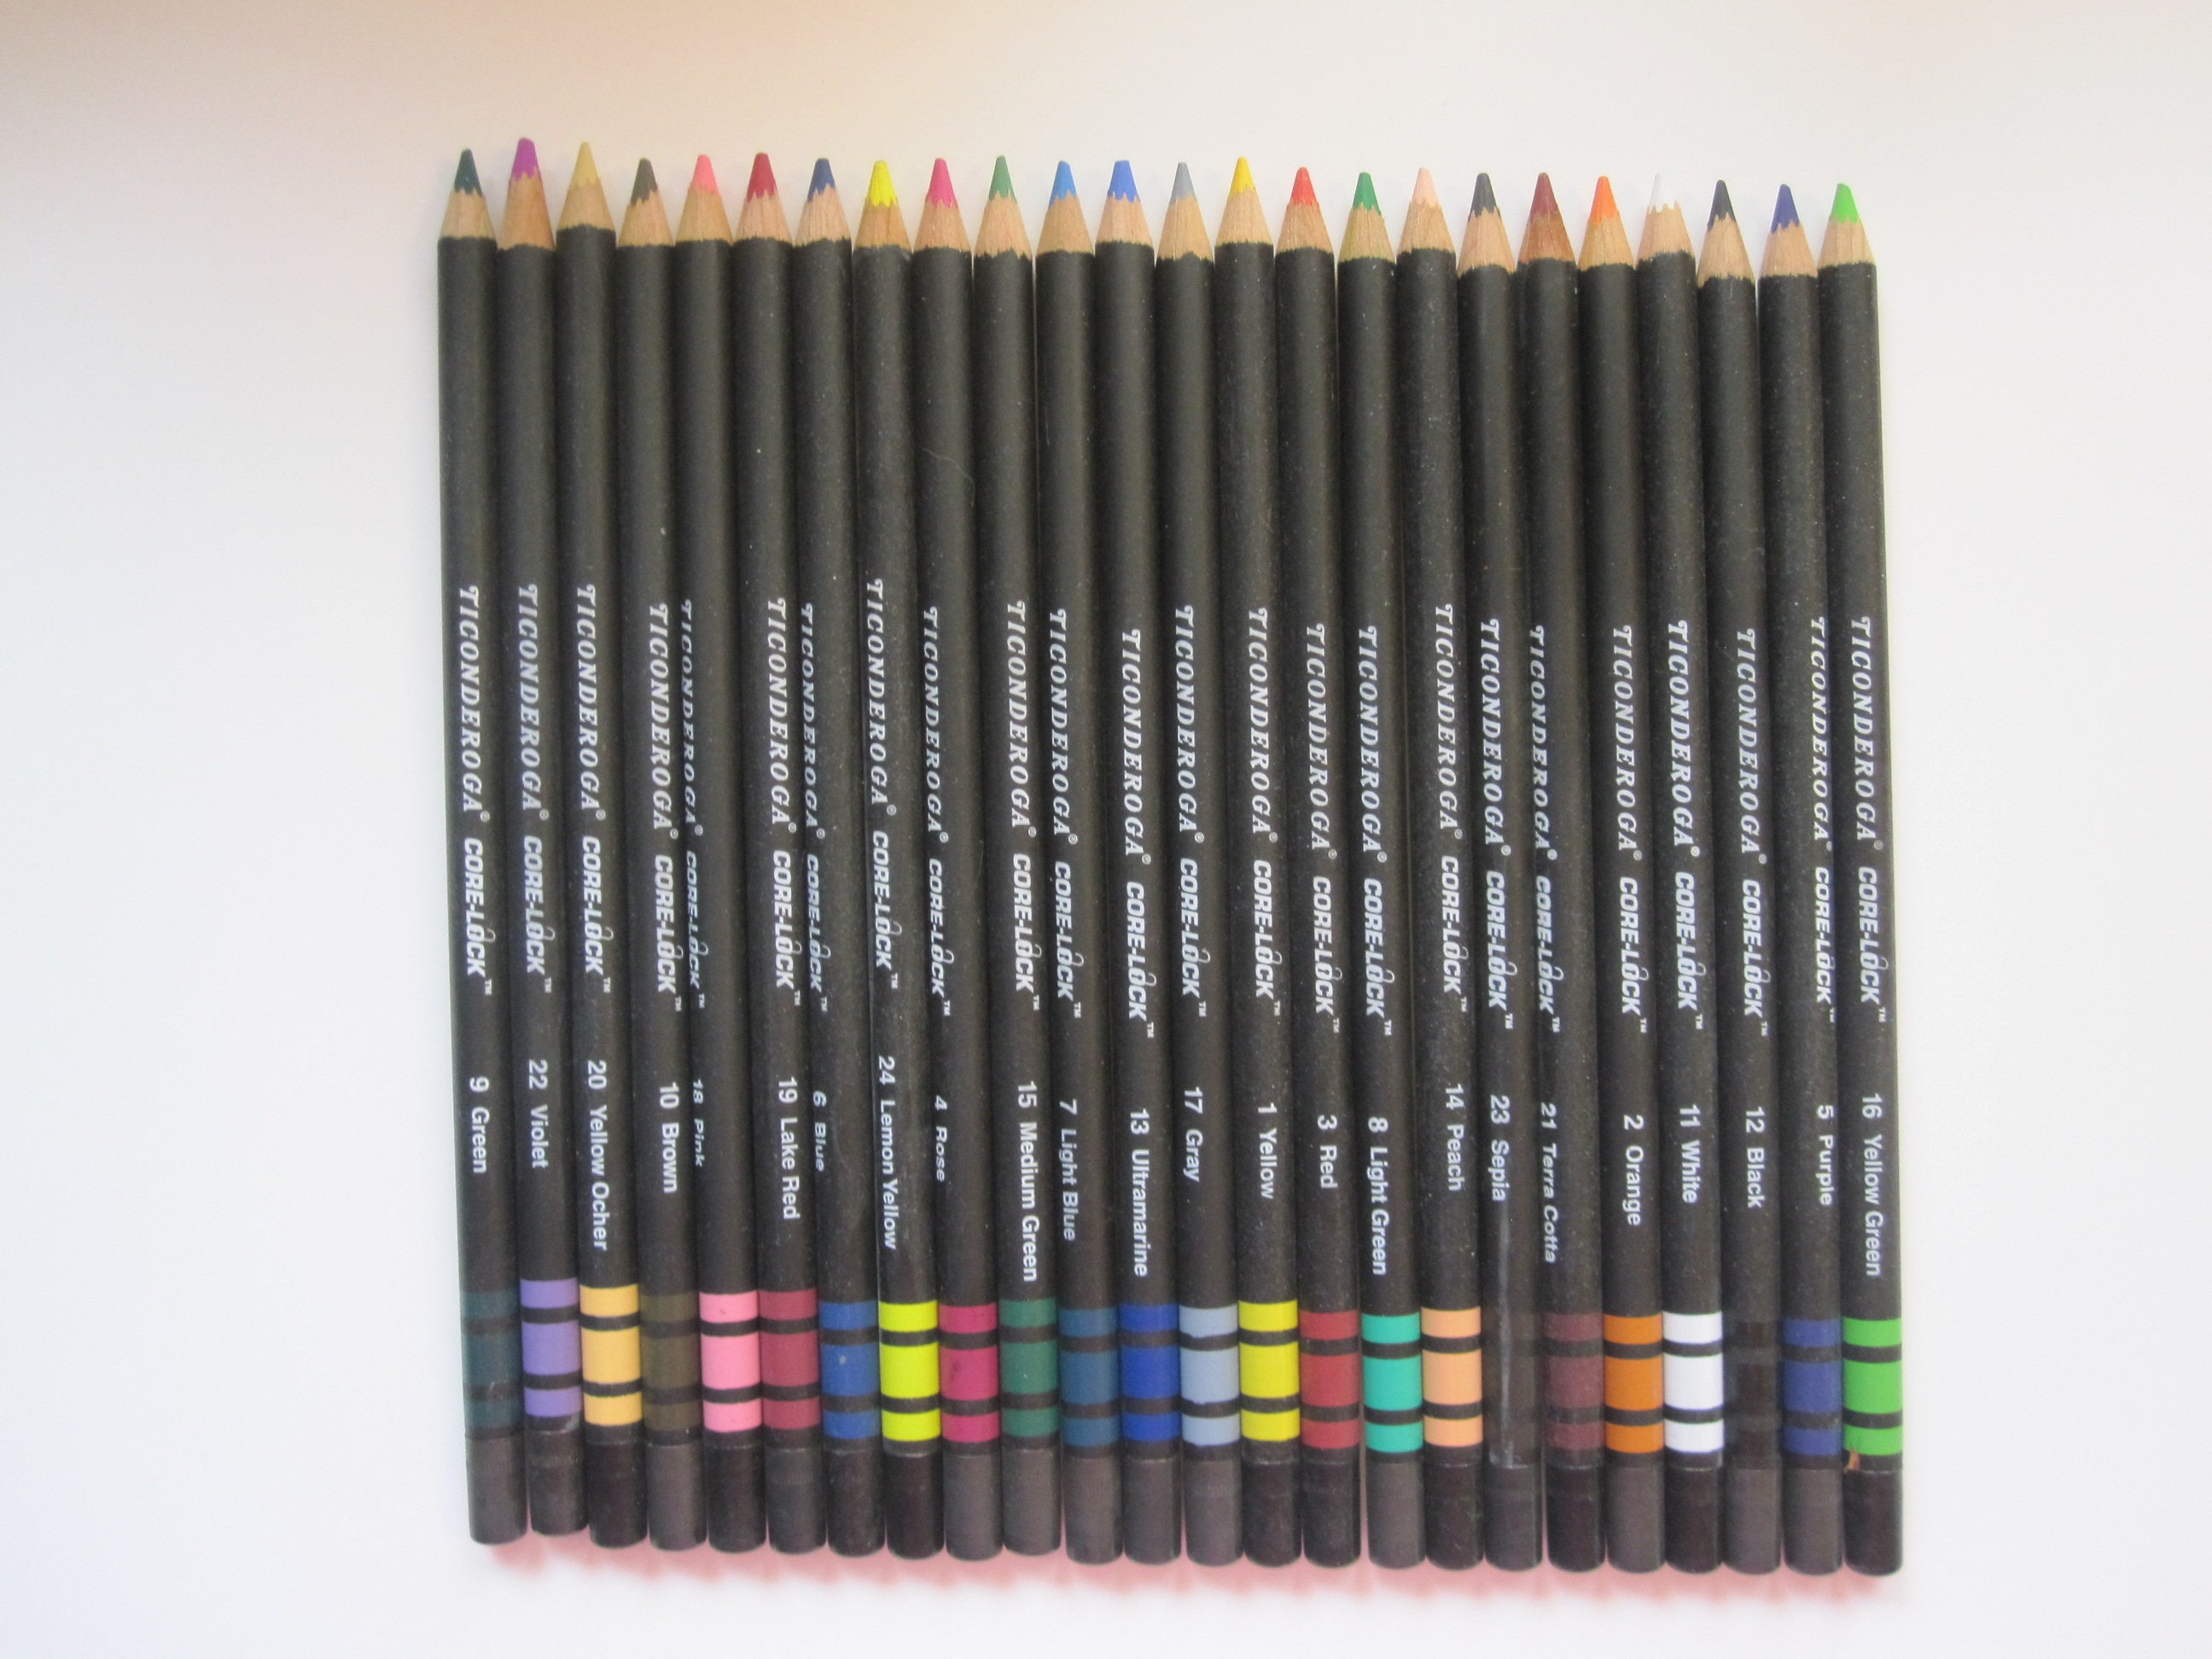 12pcs Wooden Color Pencils, 7-color Lead, Color Drawing Pencils. Suitable  For Adult & Kids' Art Creation, Home Painting, Diy Drawing And Coloring